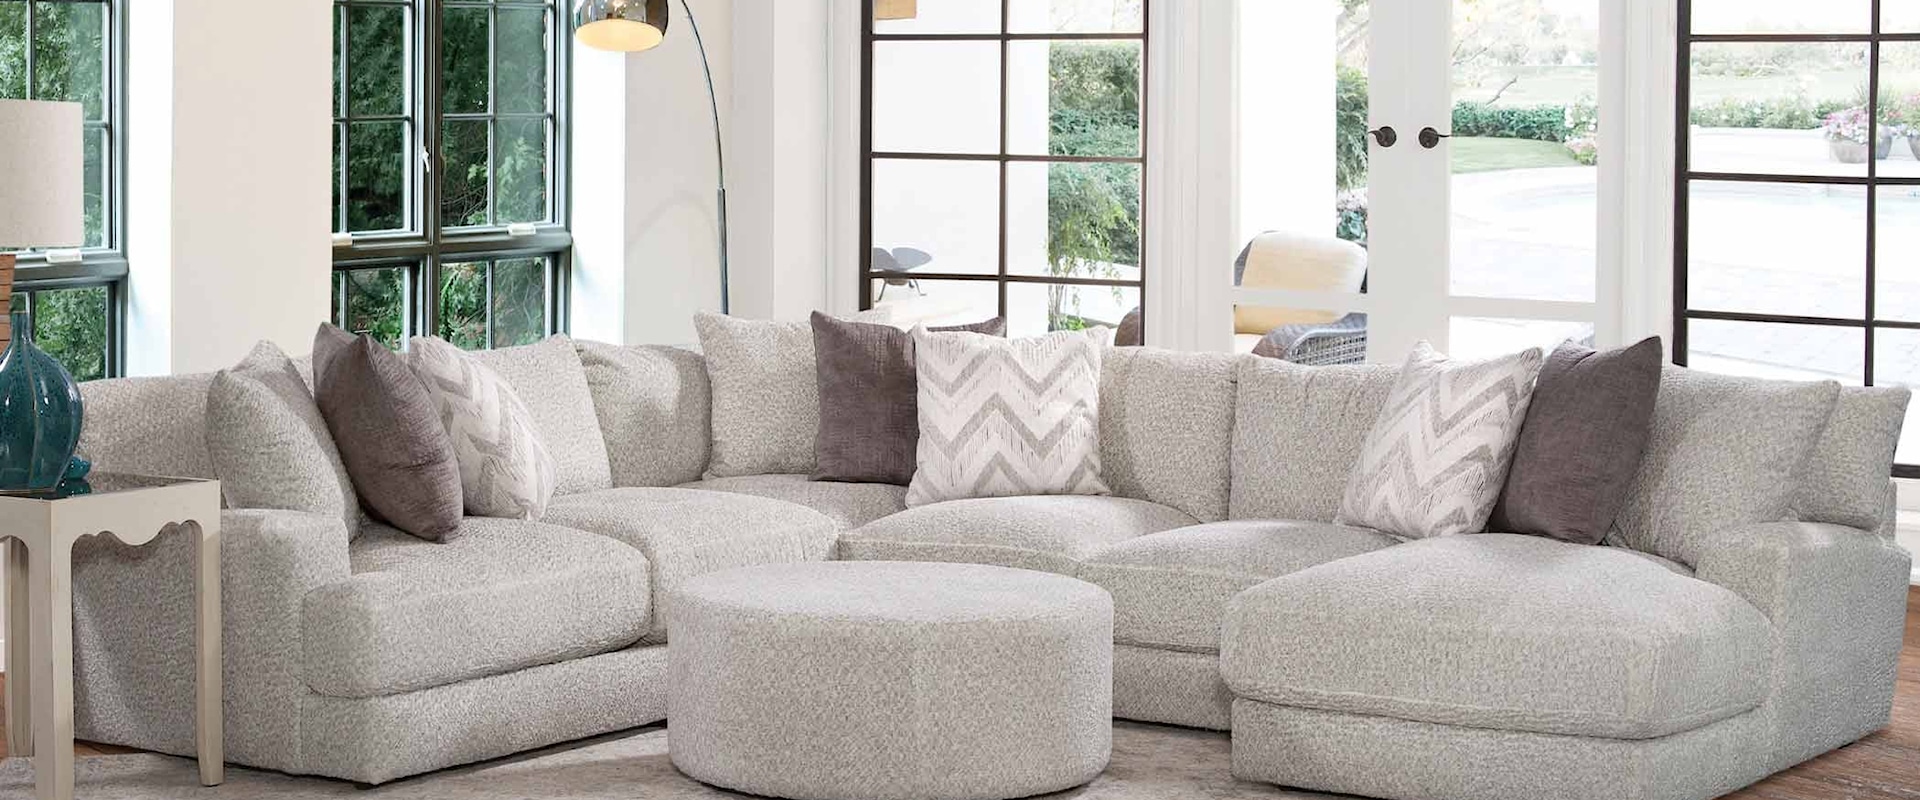 Transitional  4-Piece Modular Sectional with Round Ottoman